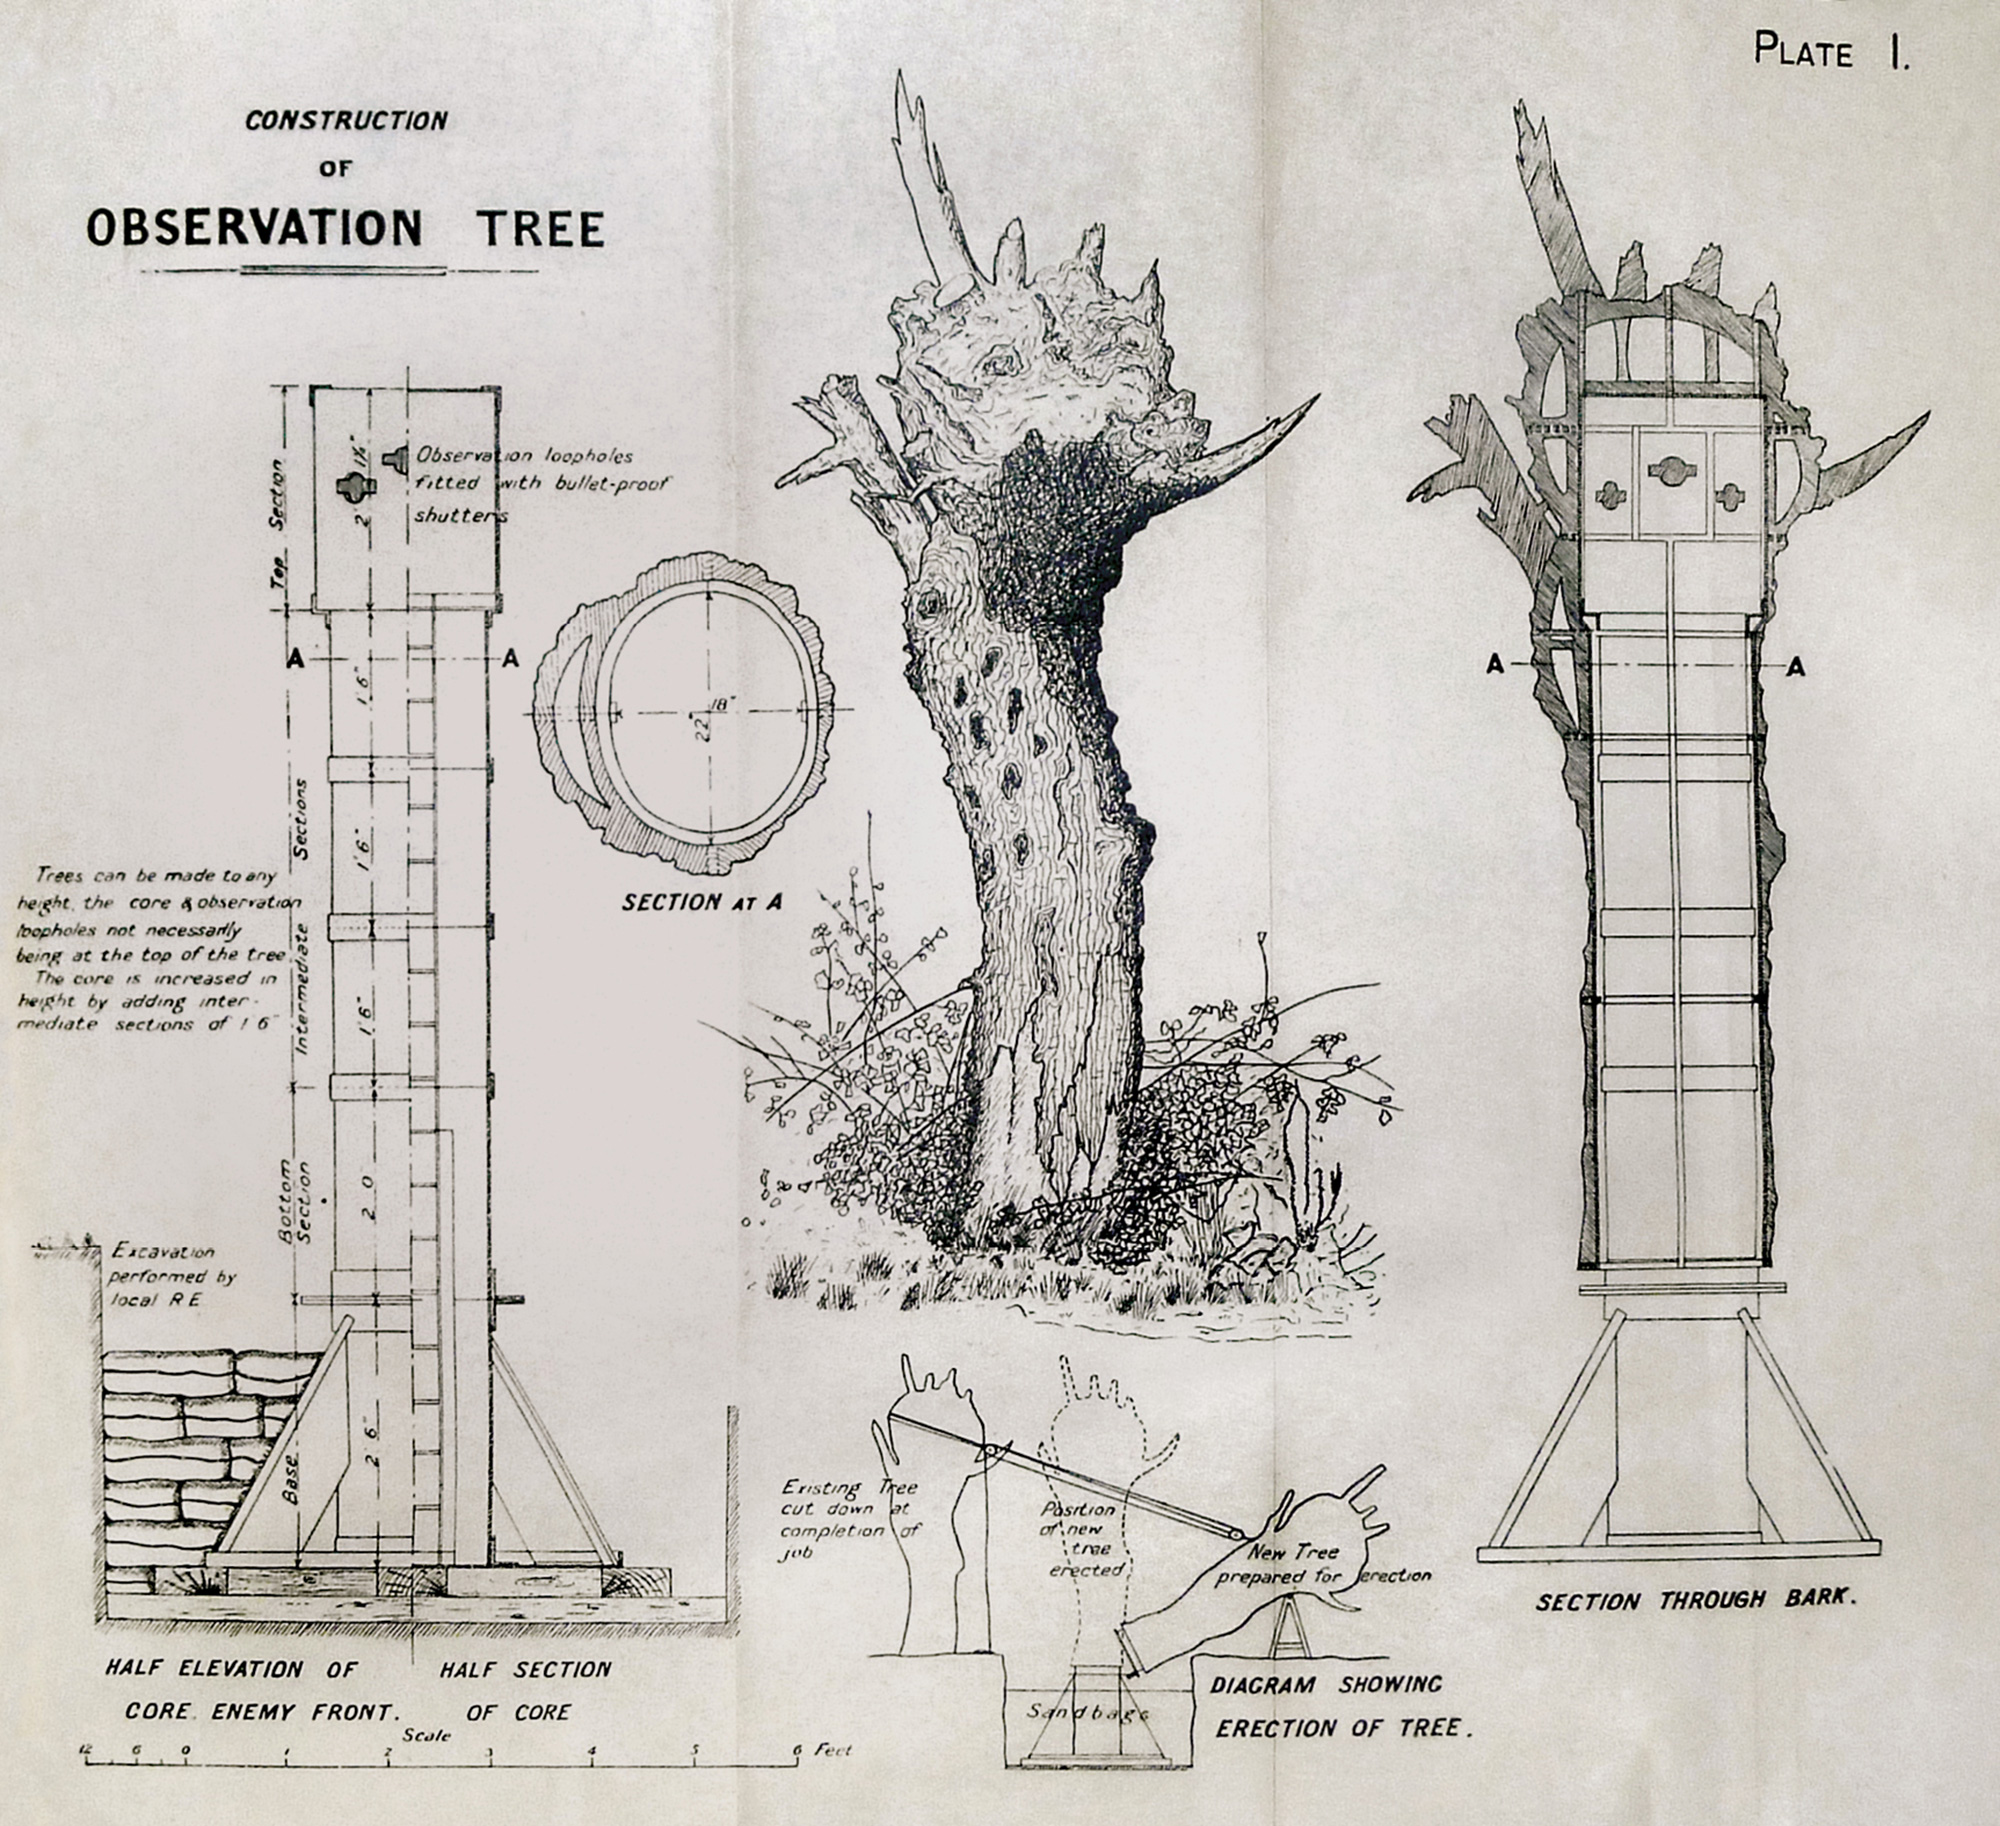 British Royal Engineers’ plans showing the construction of an observation tree. Note the pivoted pulley system used to haul the tree into position. Courtesy the Royal Engineers Museum Library and Archive.